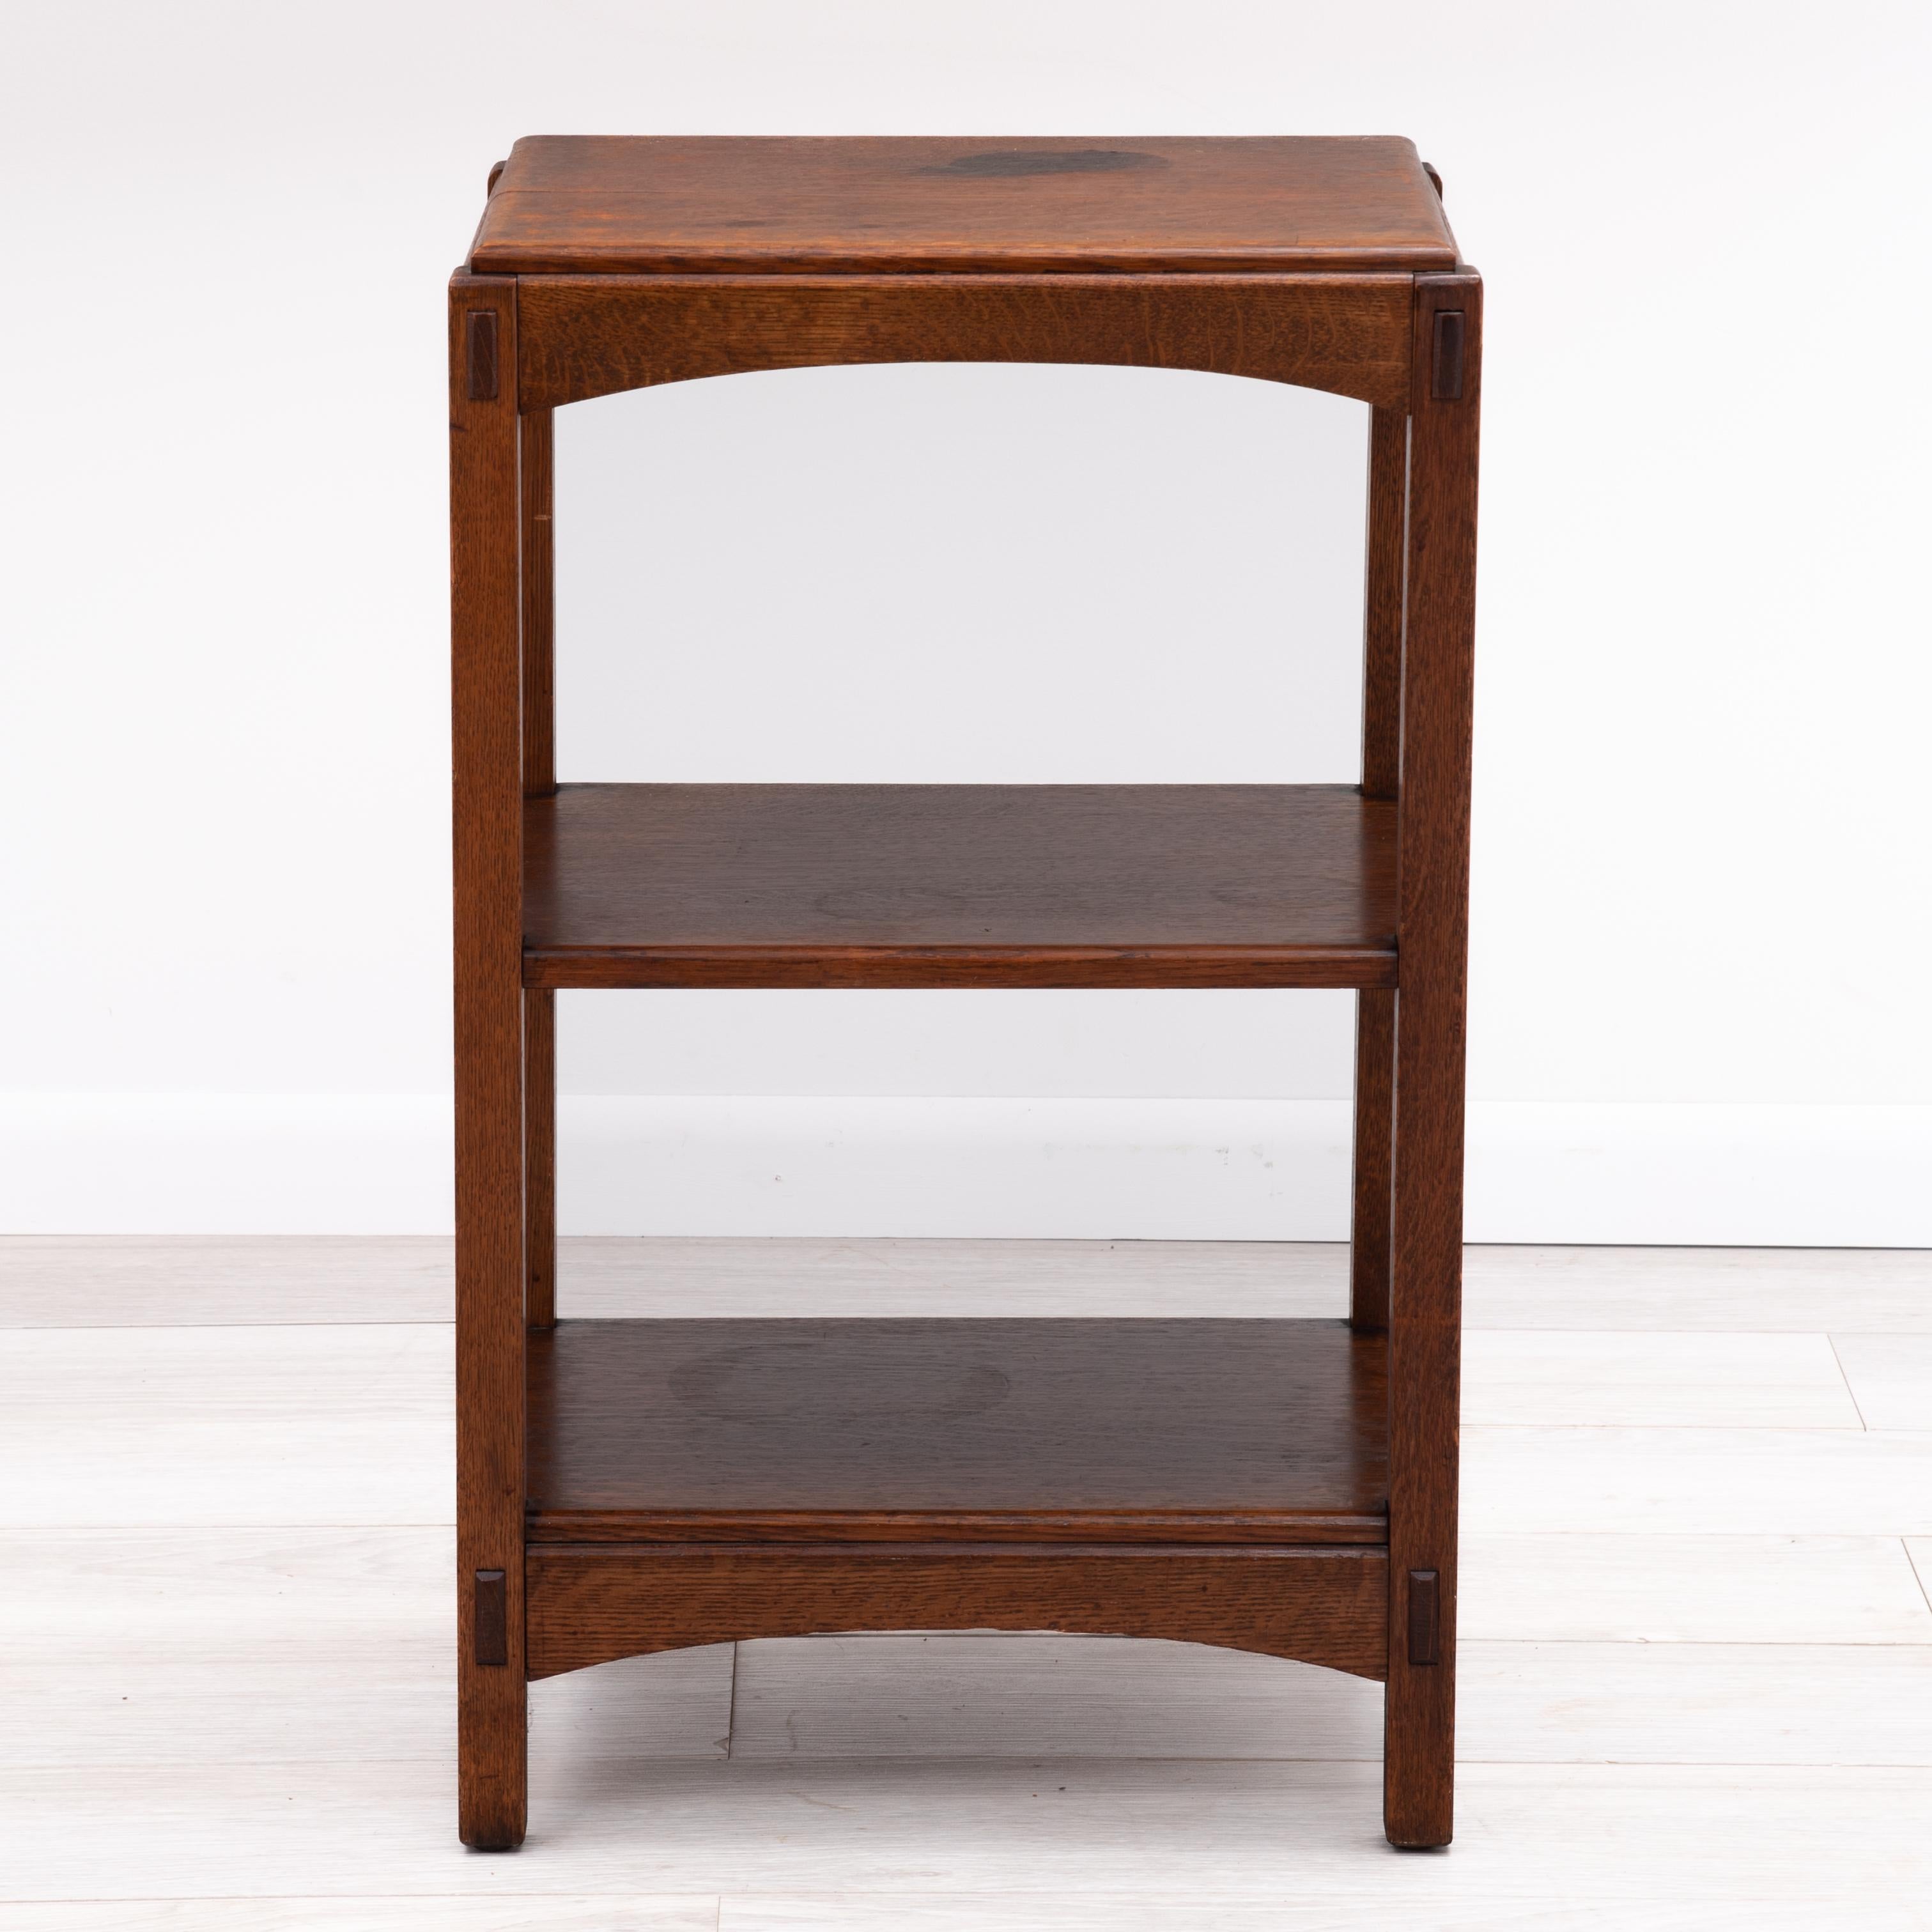 A Charles Limbert Arts & Crafts magazine stand with two shelves, arched aprons, pinned through-tenons and inset top. Fully marked with the branded mark under the bottom shelf.